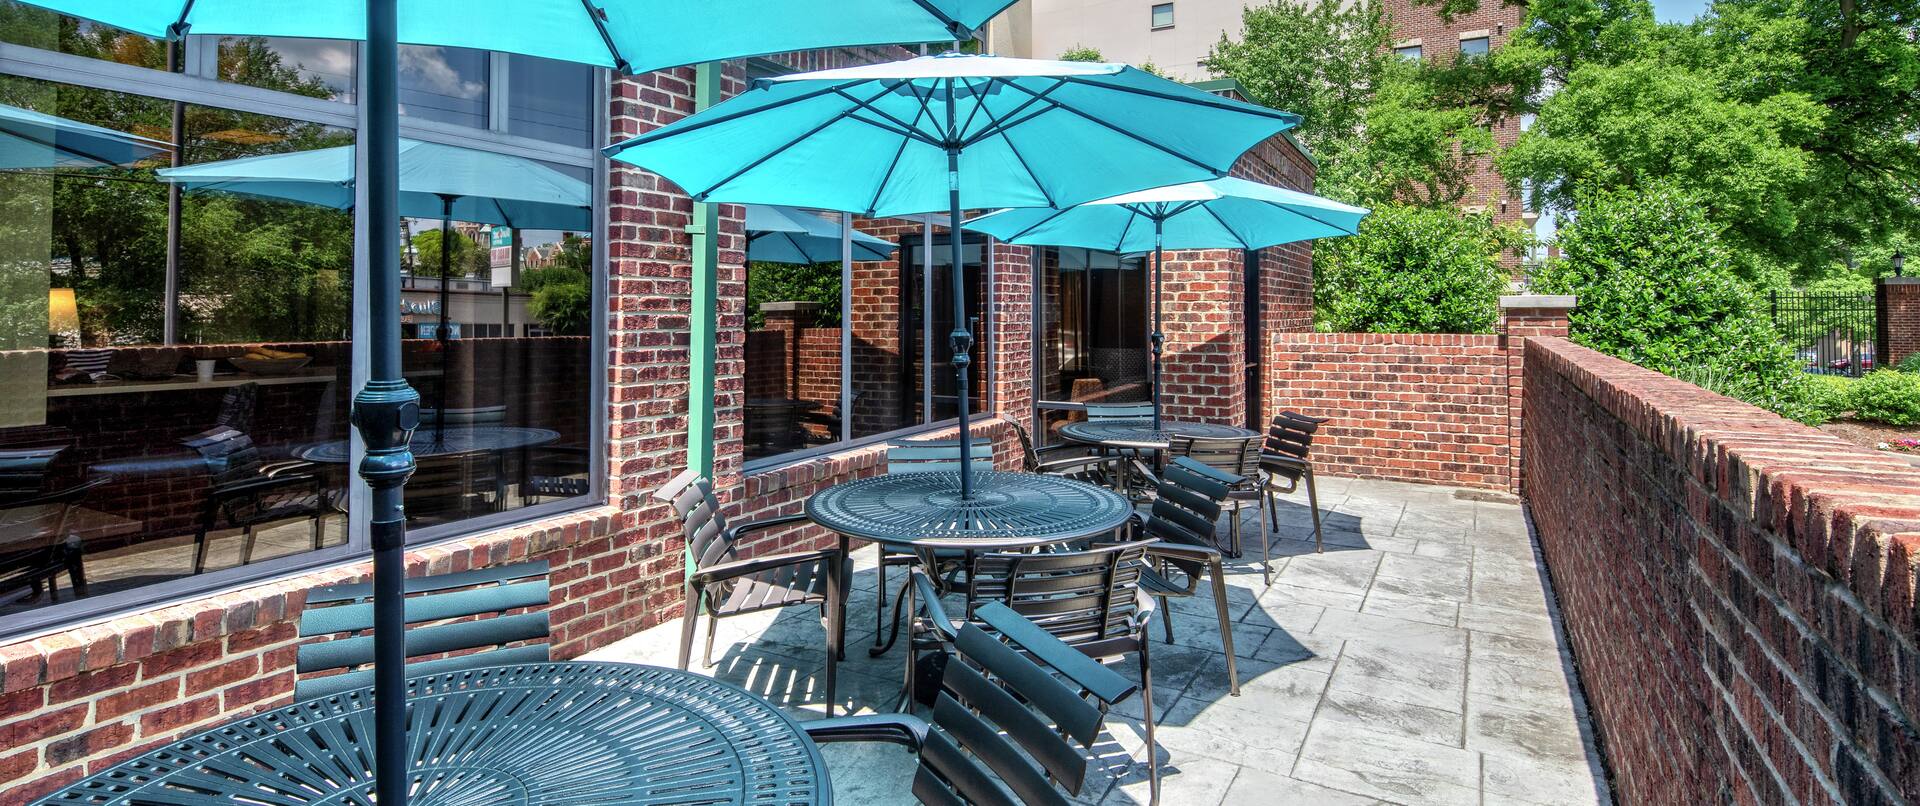 Outdoor Patio Common Area with Tables, Chairs and Large Shade Umbrellas